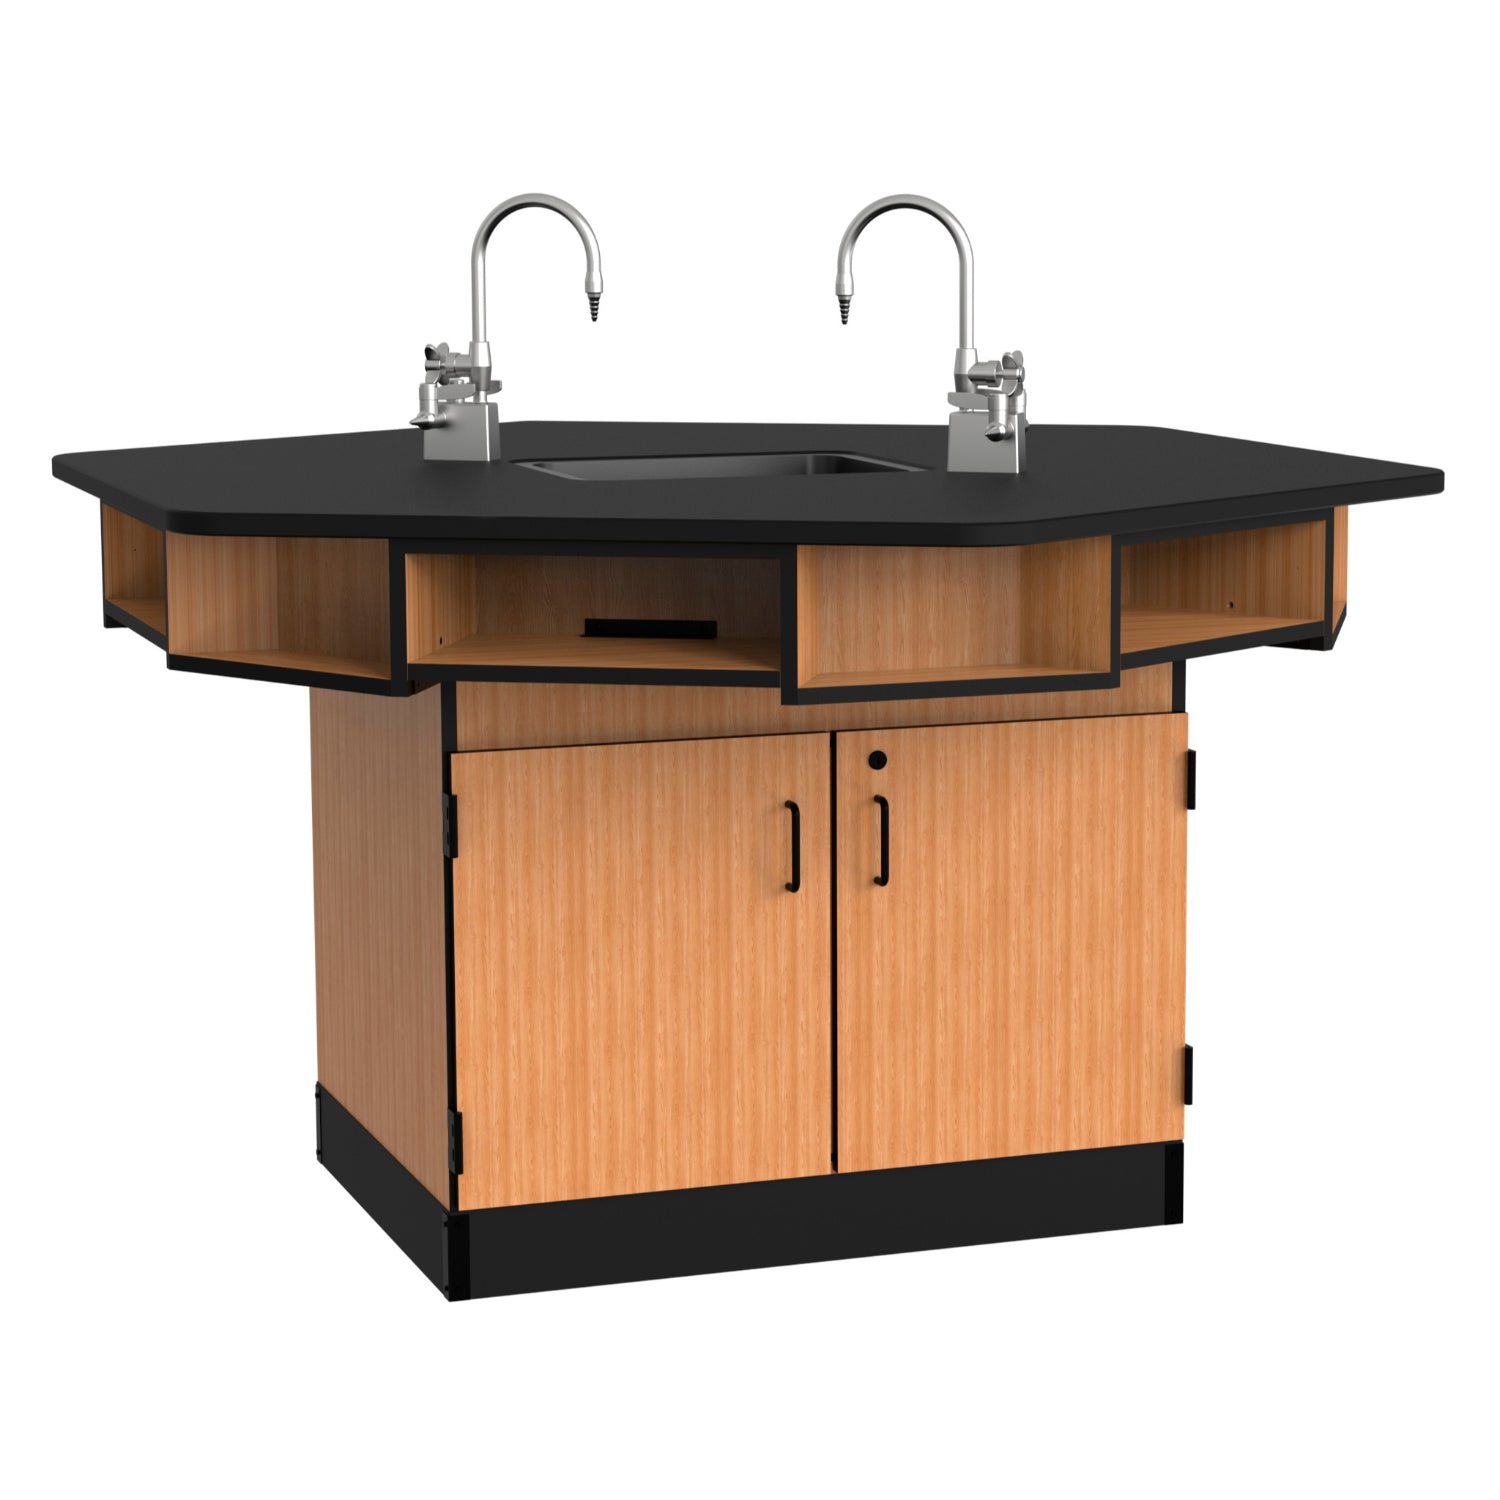 Hexagon 6-Person Science Workstation, Phenolic Top, Book Boxes, Epoxy Sink and Gas Fixtures